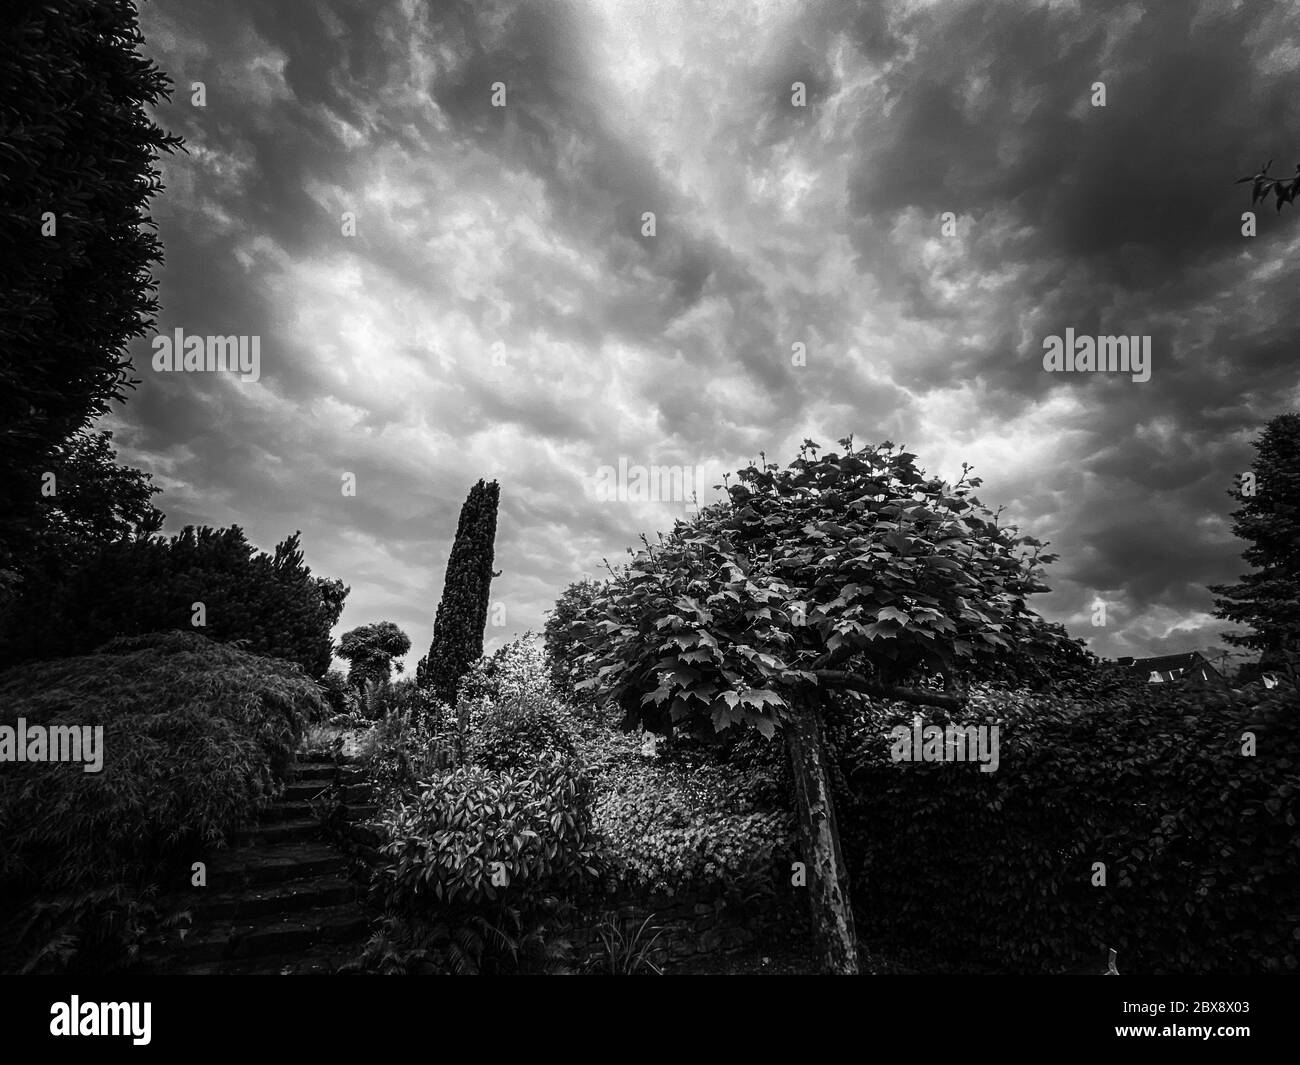 View on german garden during thunder storm with dramatic clouds and sky - Germany Stock Photo